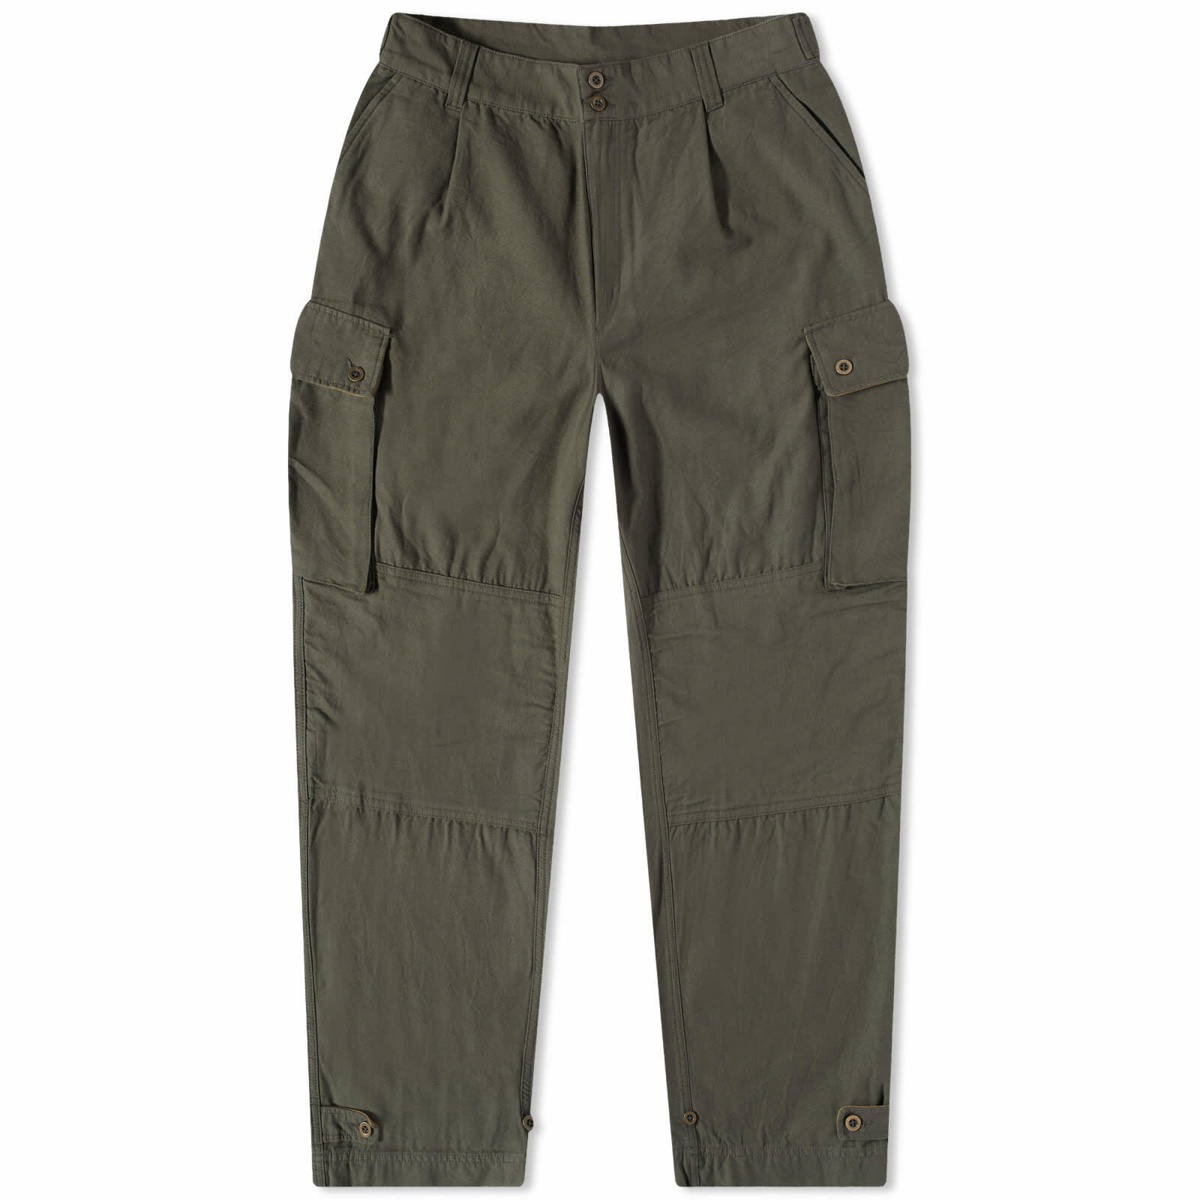 FrizmWORKS Men's M64 French Army Pants in Charcoal FrizmWORKS